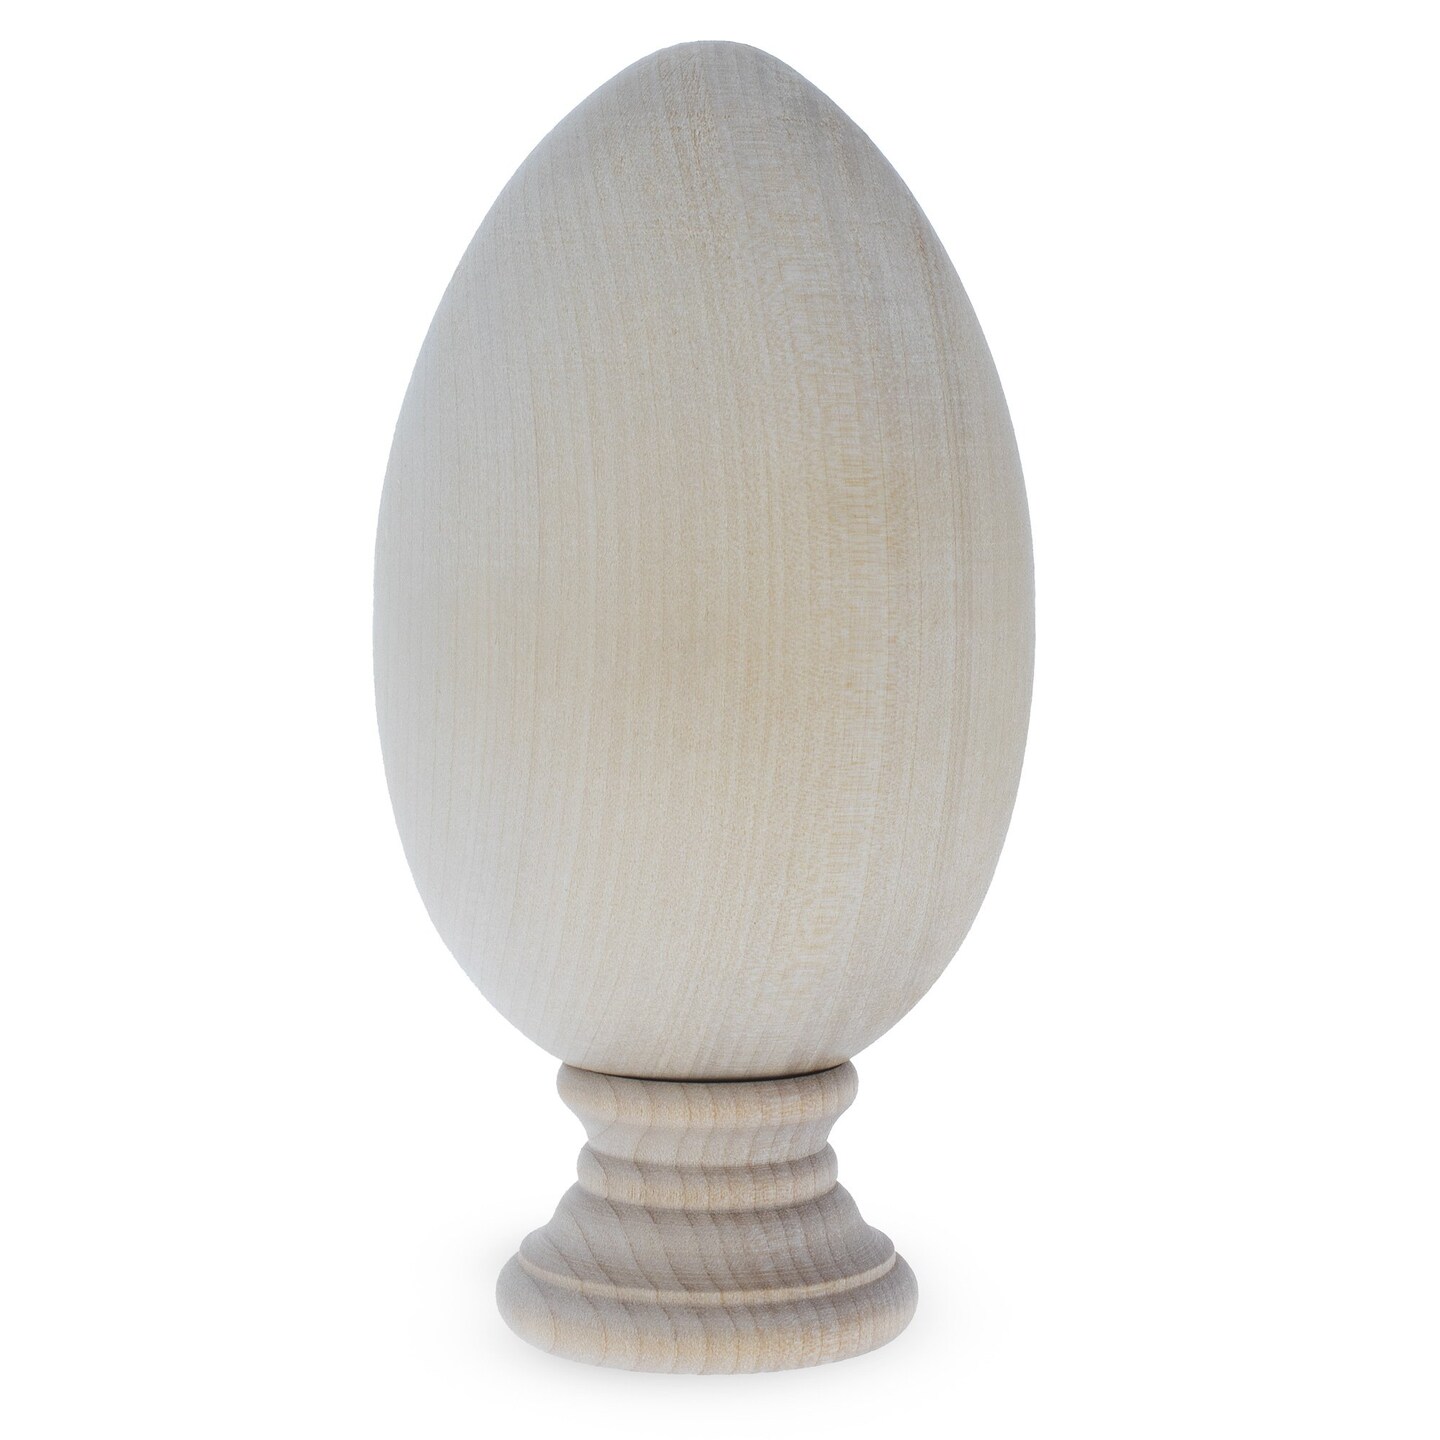 Unfinished Blank Goose Wooden Egg with Detachable Stand 4.25 Inches